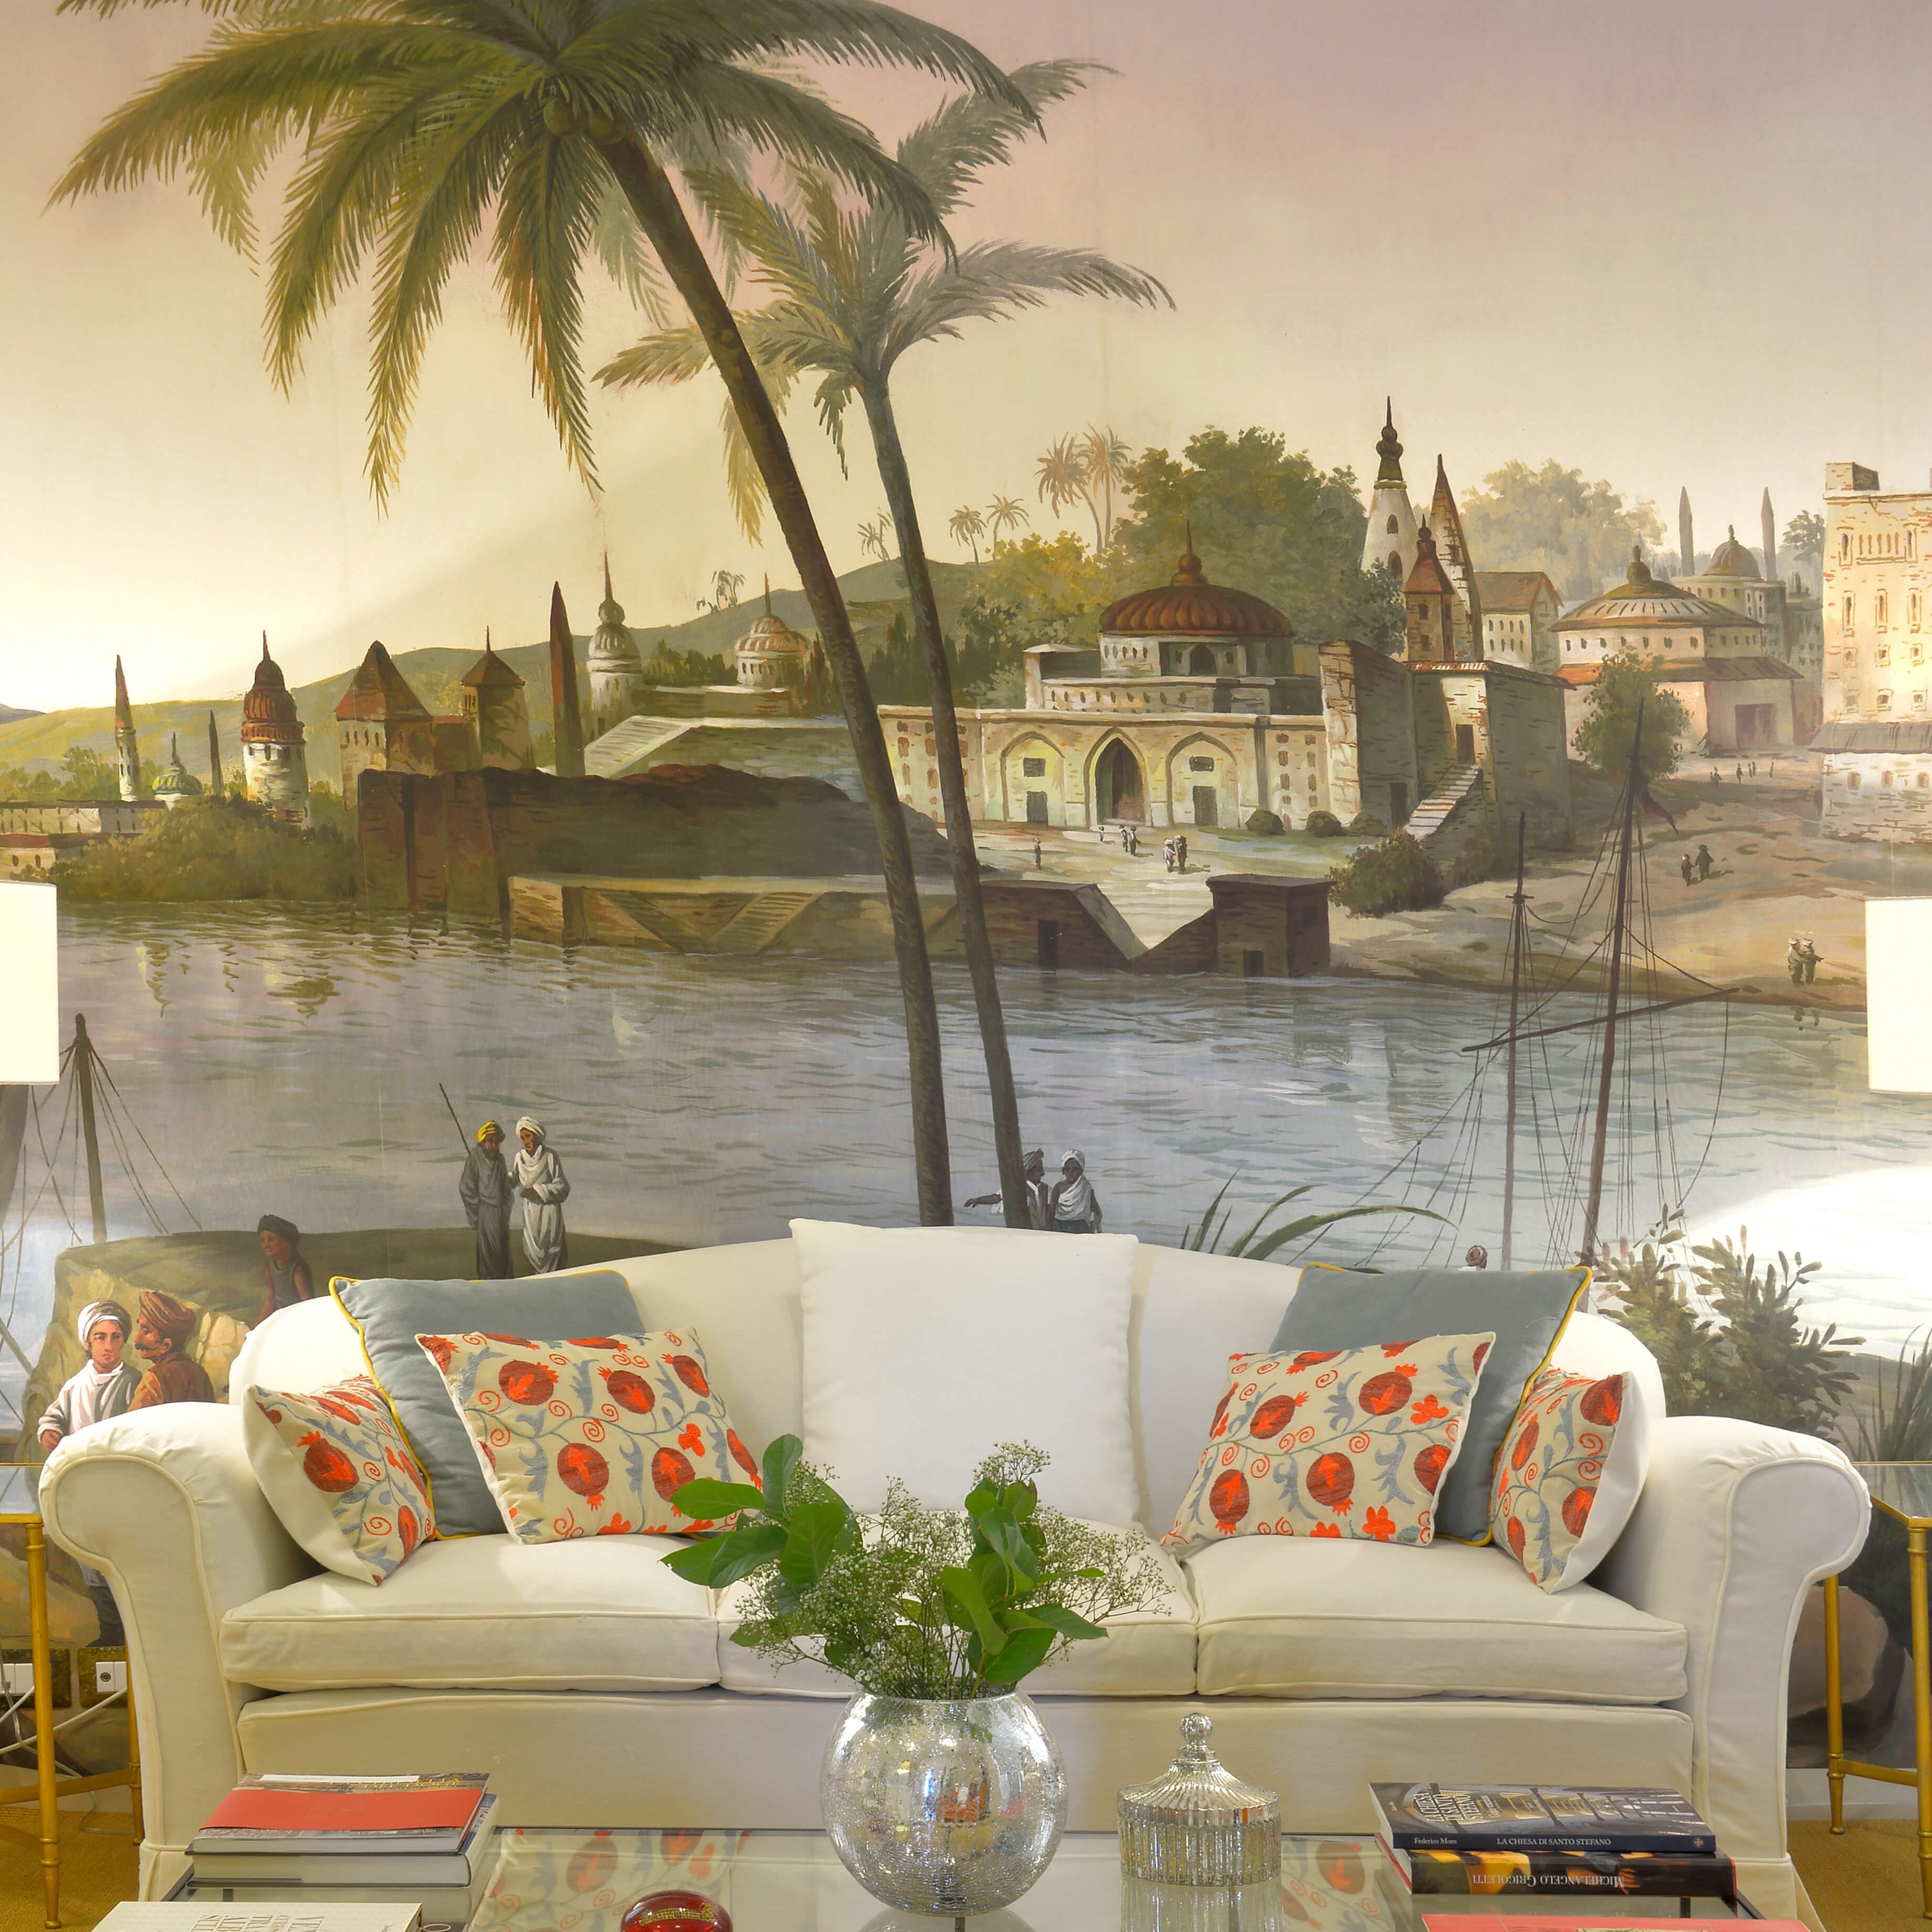 The printed panoramic wallpaper in the living room